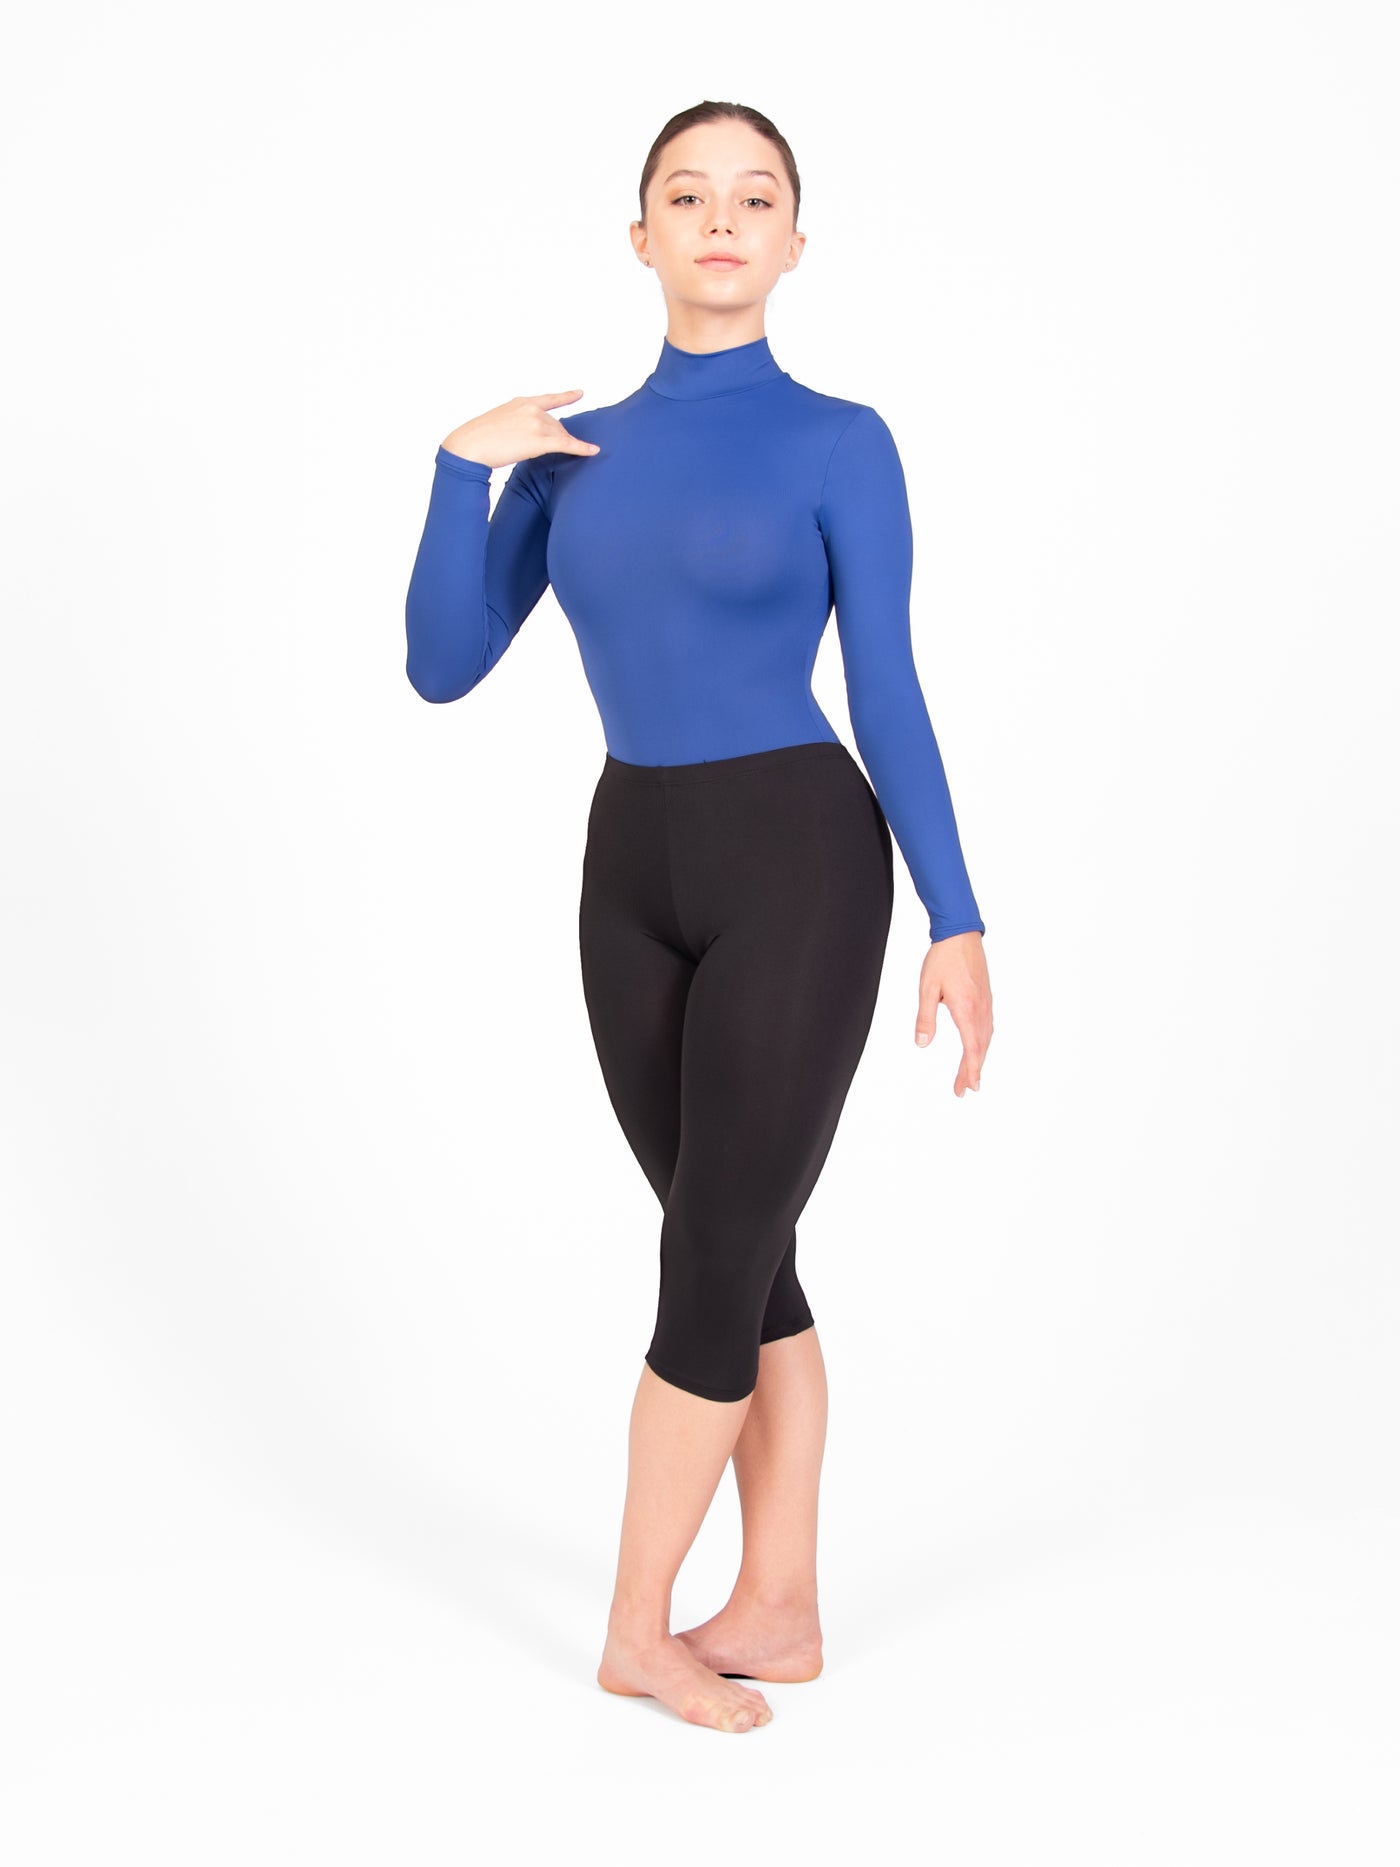 MCPORO Long Sleeve Bodysuit for Women 4/5 Pack Basic Mock Turtleneck Black  Women's Body Suits Tops : Clothing, Shoes & Jewelry 